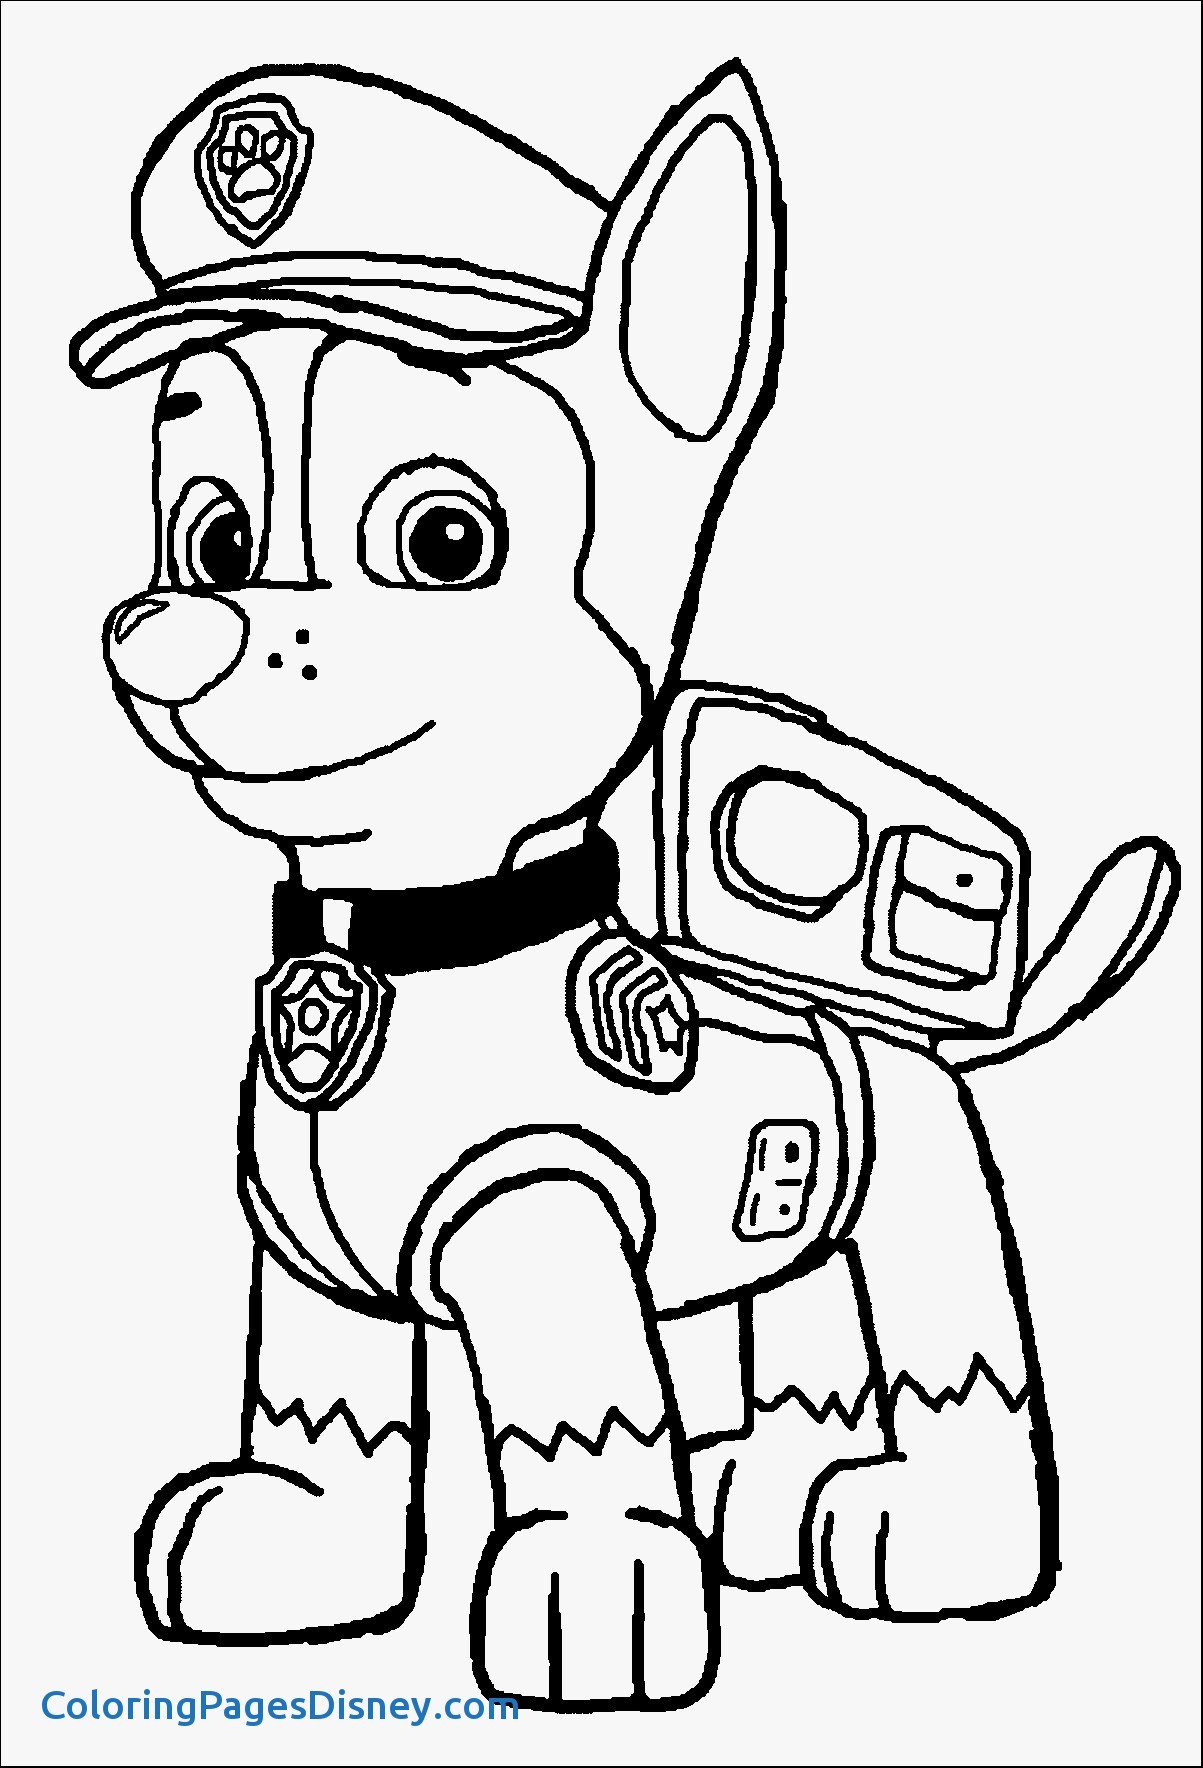 Paw Patrol Coloring Pages FREE Printable 5